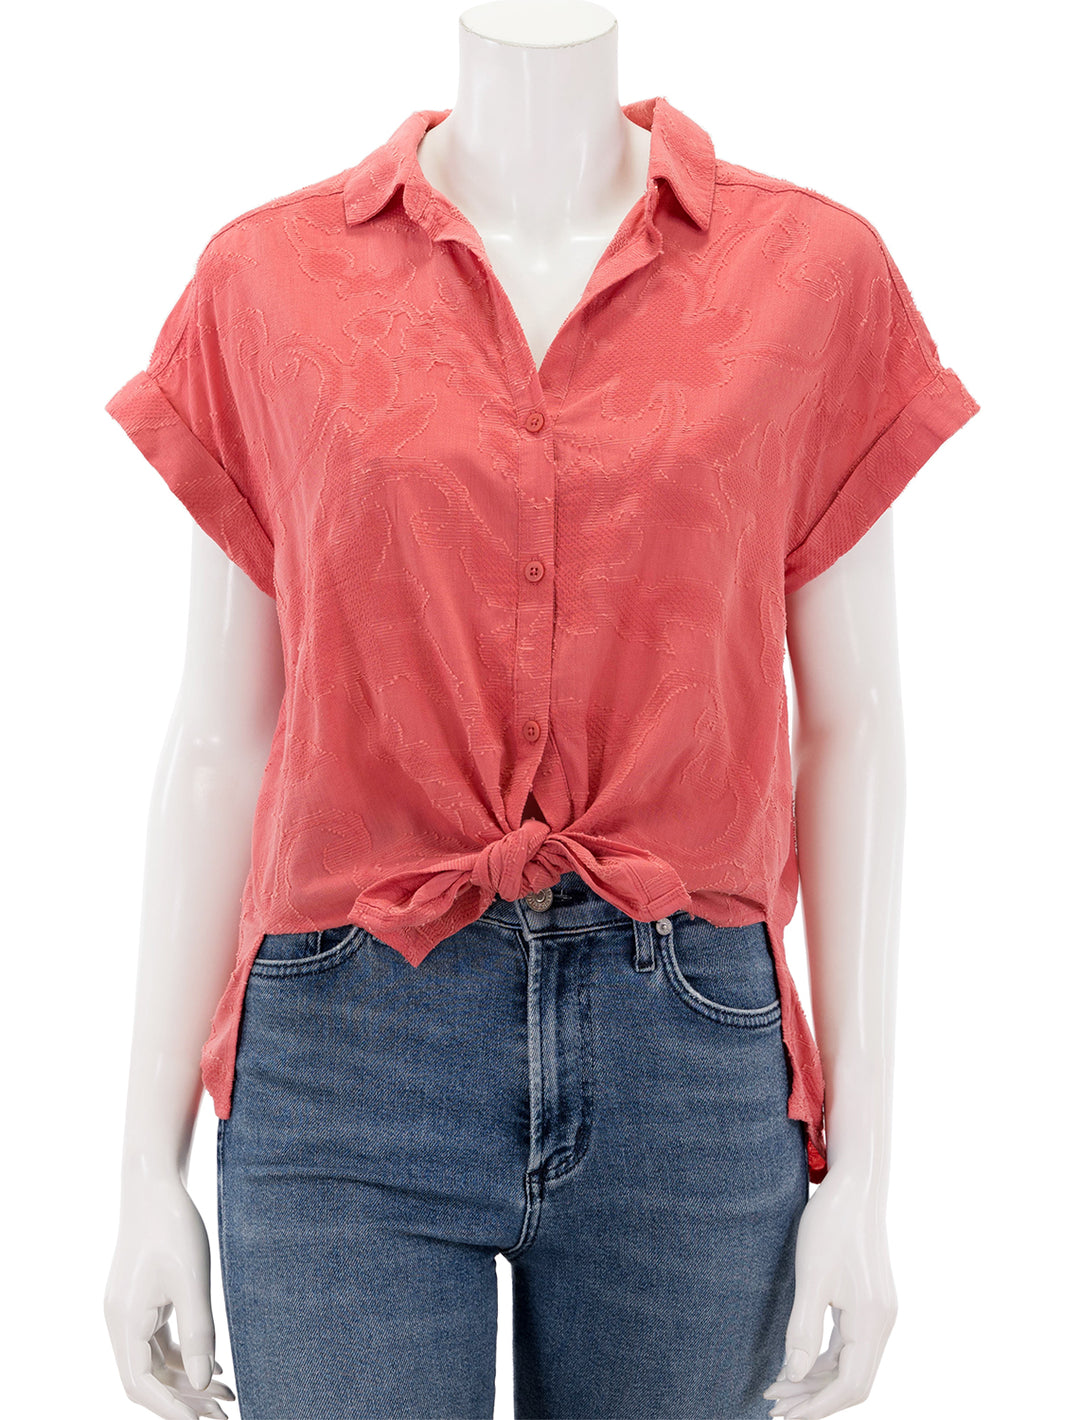 Front view of Splendid's kathryn jacquard shirt in guava.